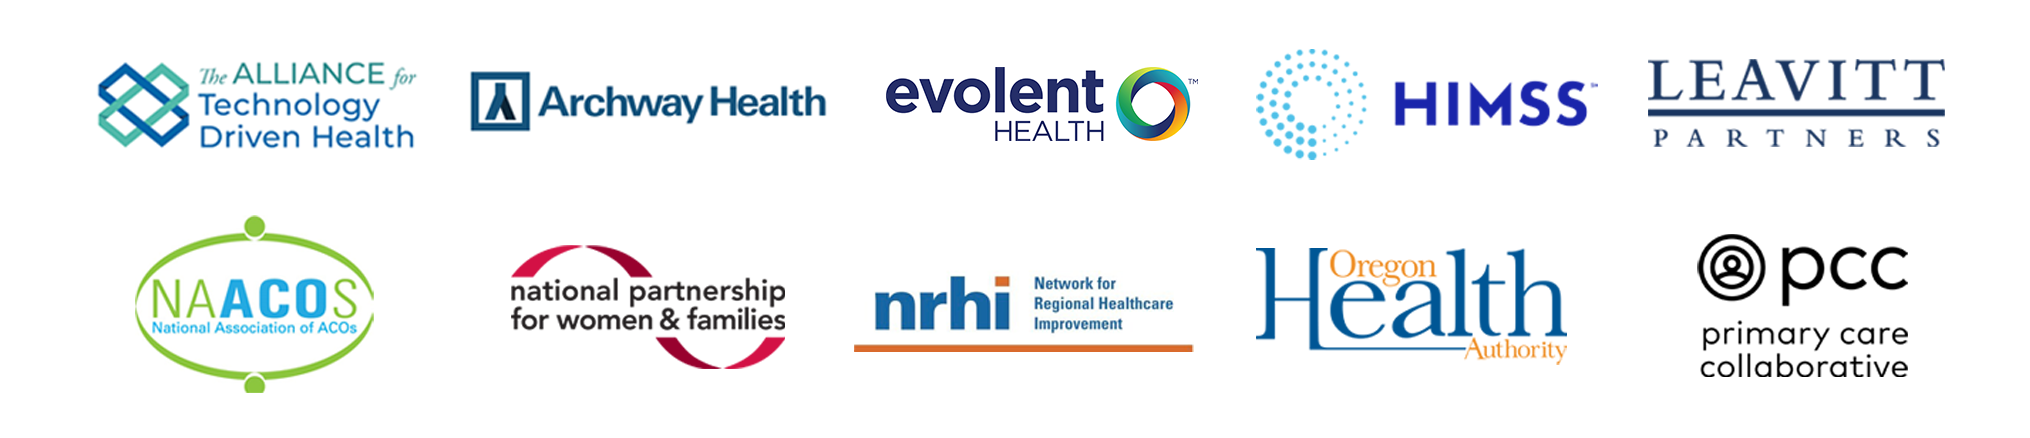 Logos for The Alliance for Technology Driven Health, Archway Health, Evolent Health, HIMSS, Leavitt Partners, National Association of ACOs, National Partnership for Women and Families, Network for Regional Healthcare Improvement, Oregon Health Authority, and Primary Care Collaborative